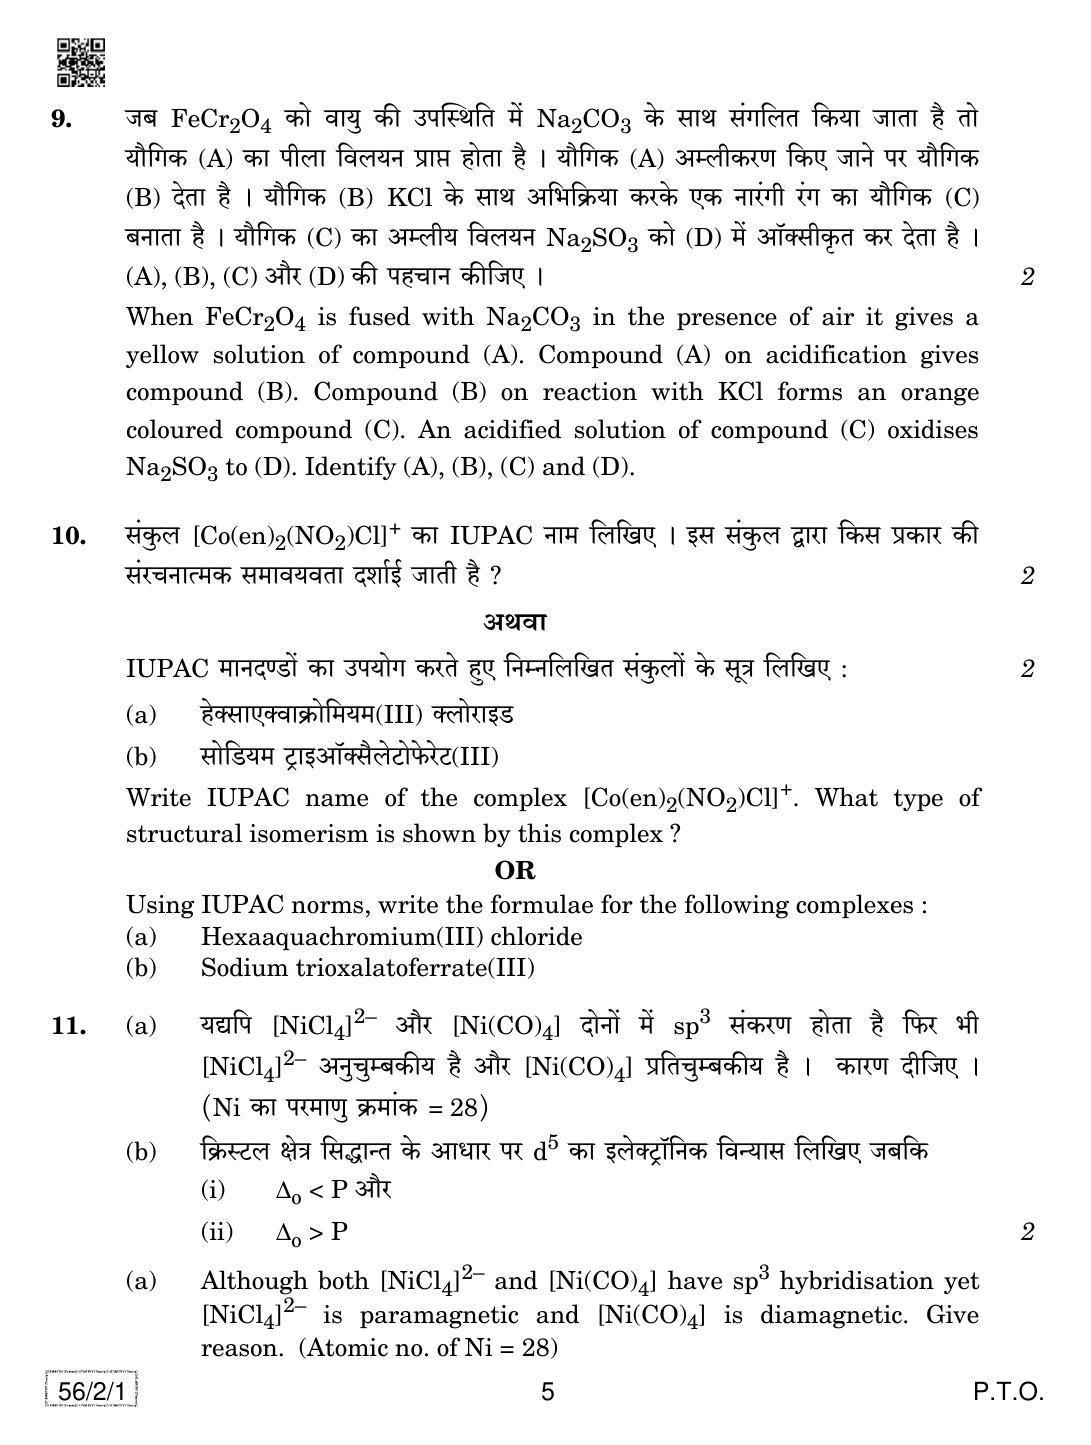 CBSE Class 12 56-2-1 Chemistry 2019 Question Paper - Page 5